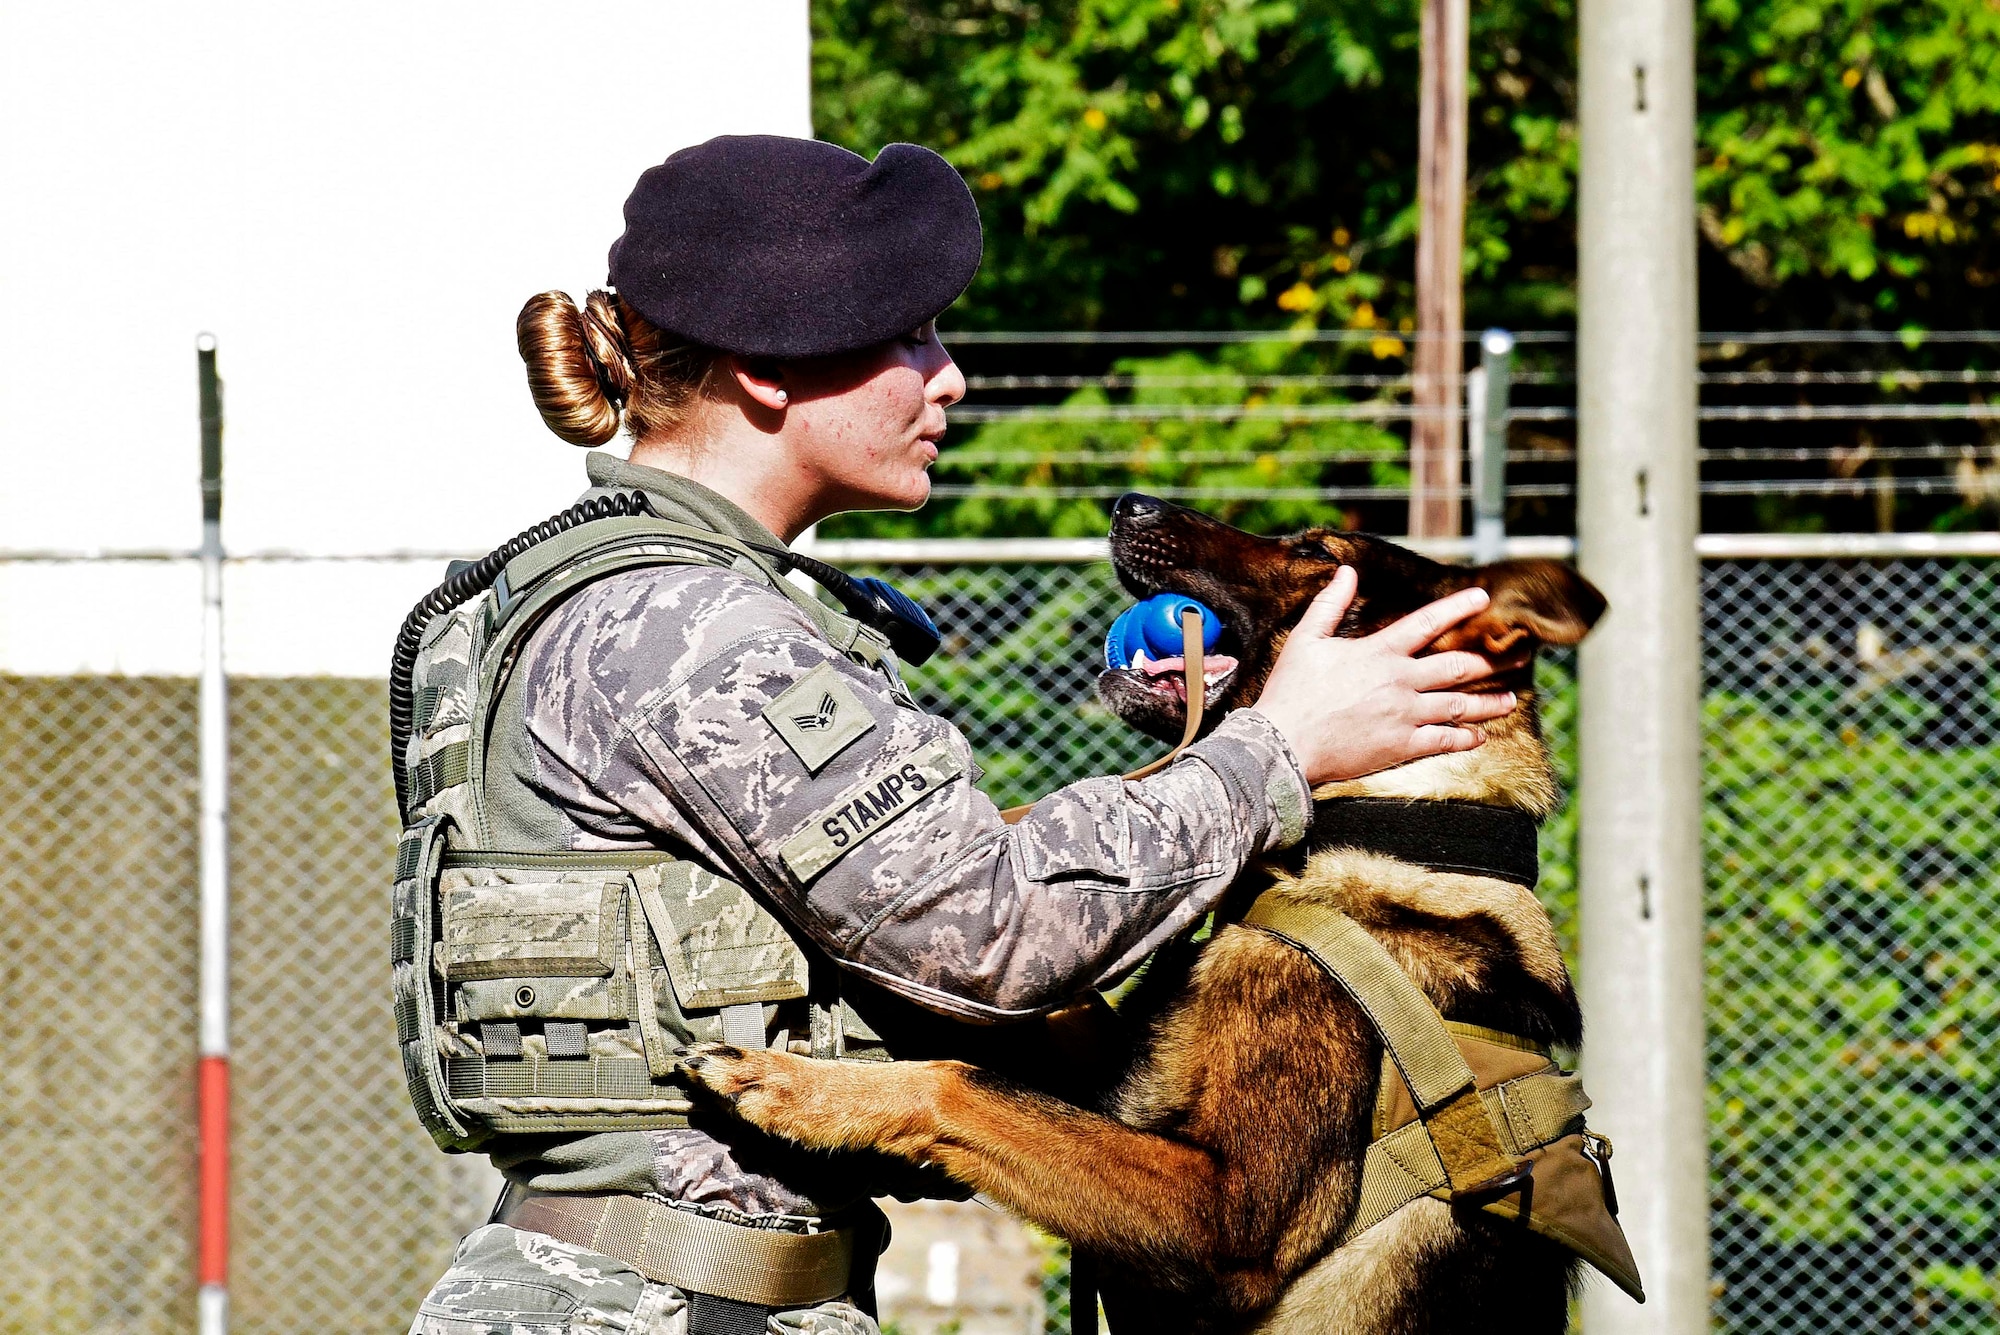 U.S. Air Force Senior Airman Alyssa Stamps, 35th Security Forces Squadron military working dog handler, plays with her dog, Elvis, at Misawa Air Base, Japan, Sept. 23, 2015. Stamps and Elvis are training to become a certified MWD team to partake in real-world scenarios. (U.S. Air Force photo by Airman 1st Class Jordyn Fetter/Released)